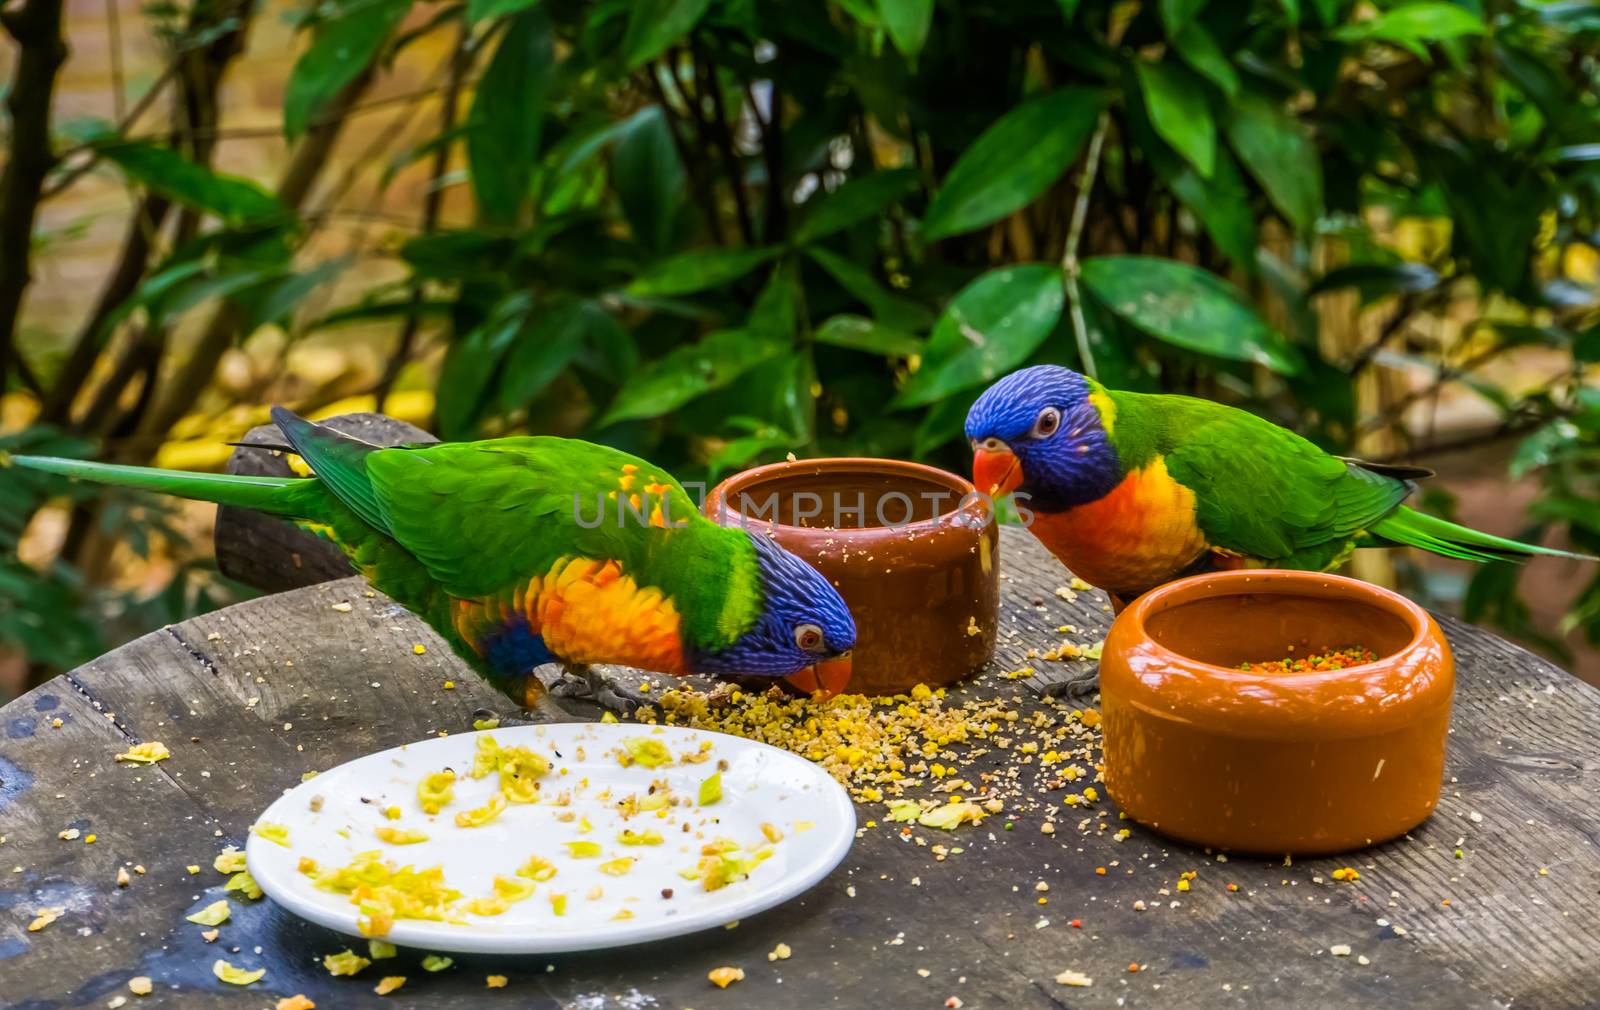 two rainbow lorikeets eating food together, bird diet, Tropical animal specie from Australia by charlottebleijenberg